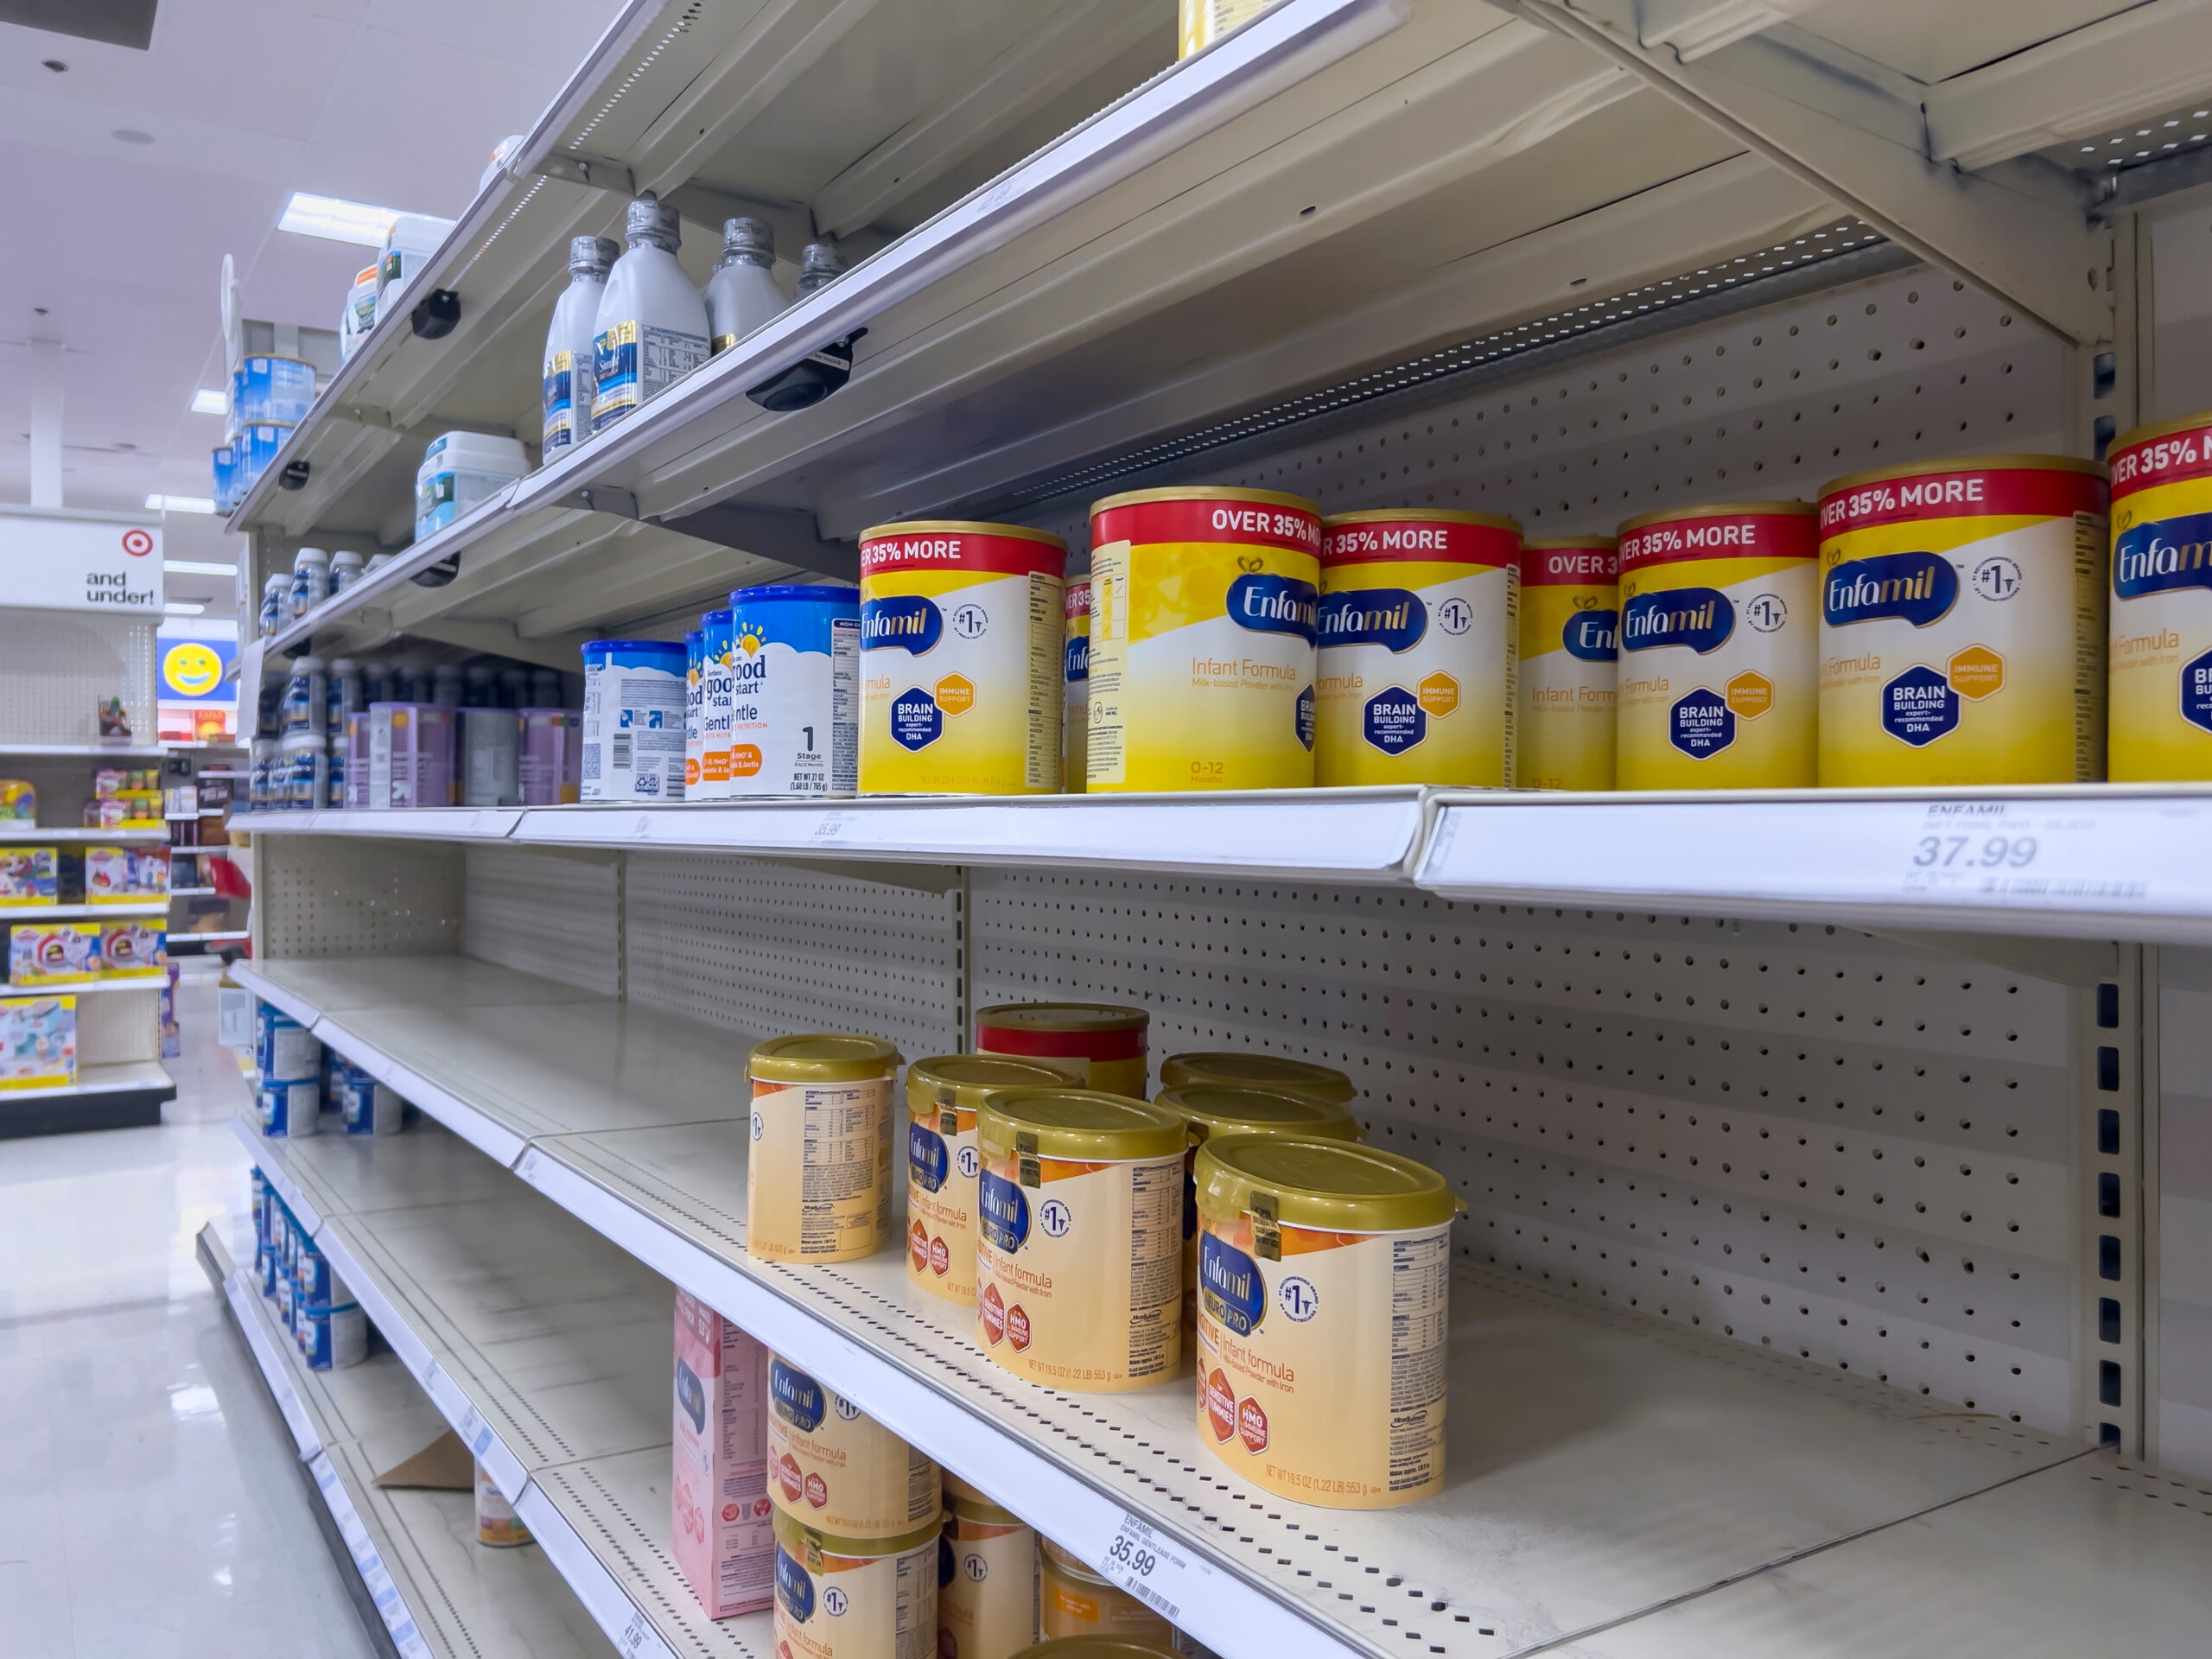 Store shelves show only some cans of Enfamil and low stocks of infant formula overall.